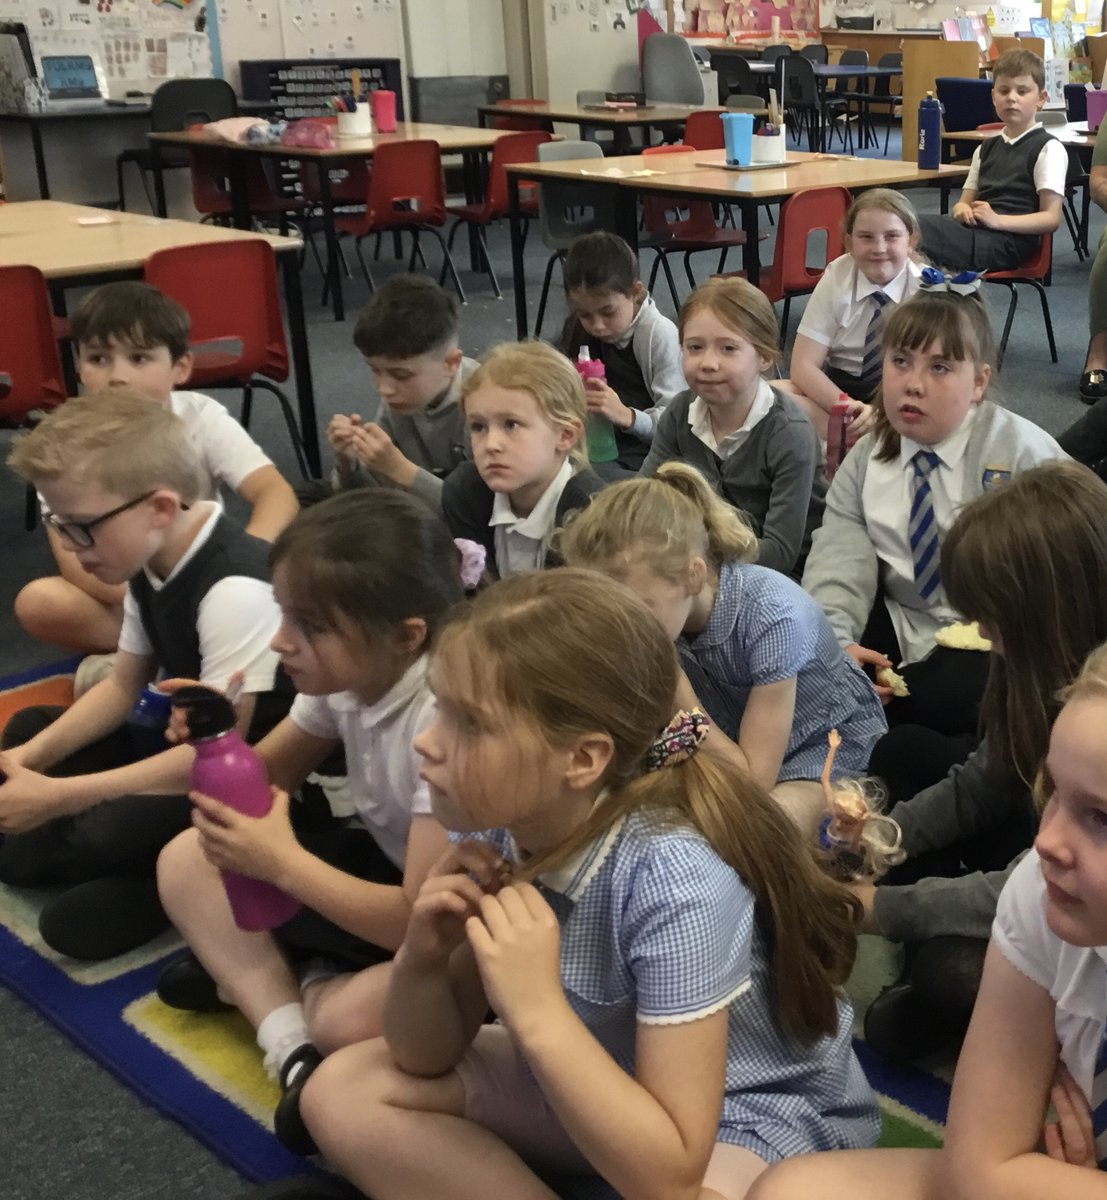 P3 are taking part in #BBCLiveLessons for Mental Health Awareness Week. We love being active by dancing, doing gymnastics, playing football, bouncing a ball, playing laser tag, boxing, singing and doing actions. #MentalHealth #Active